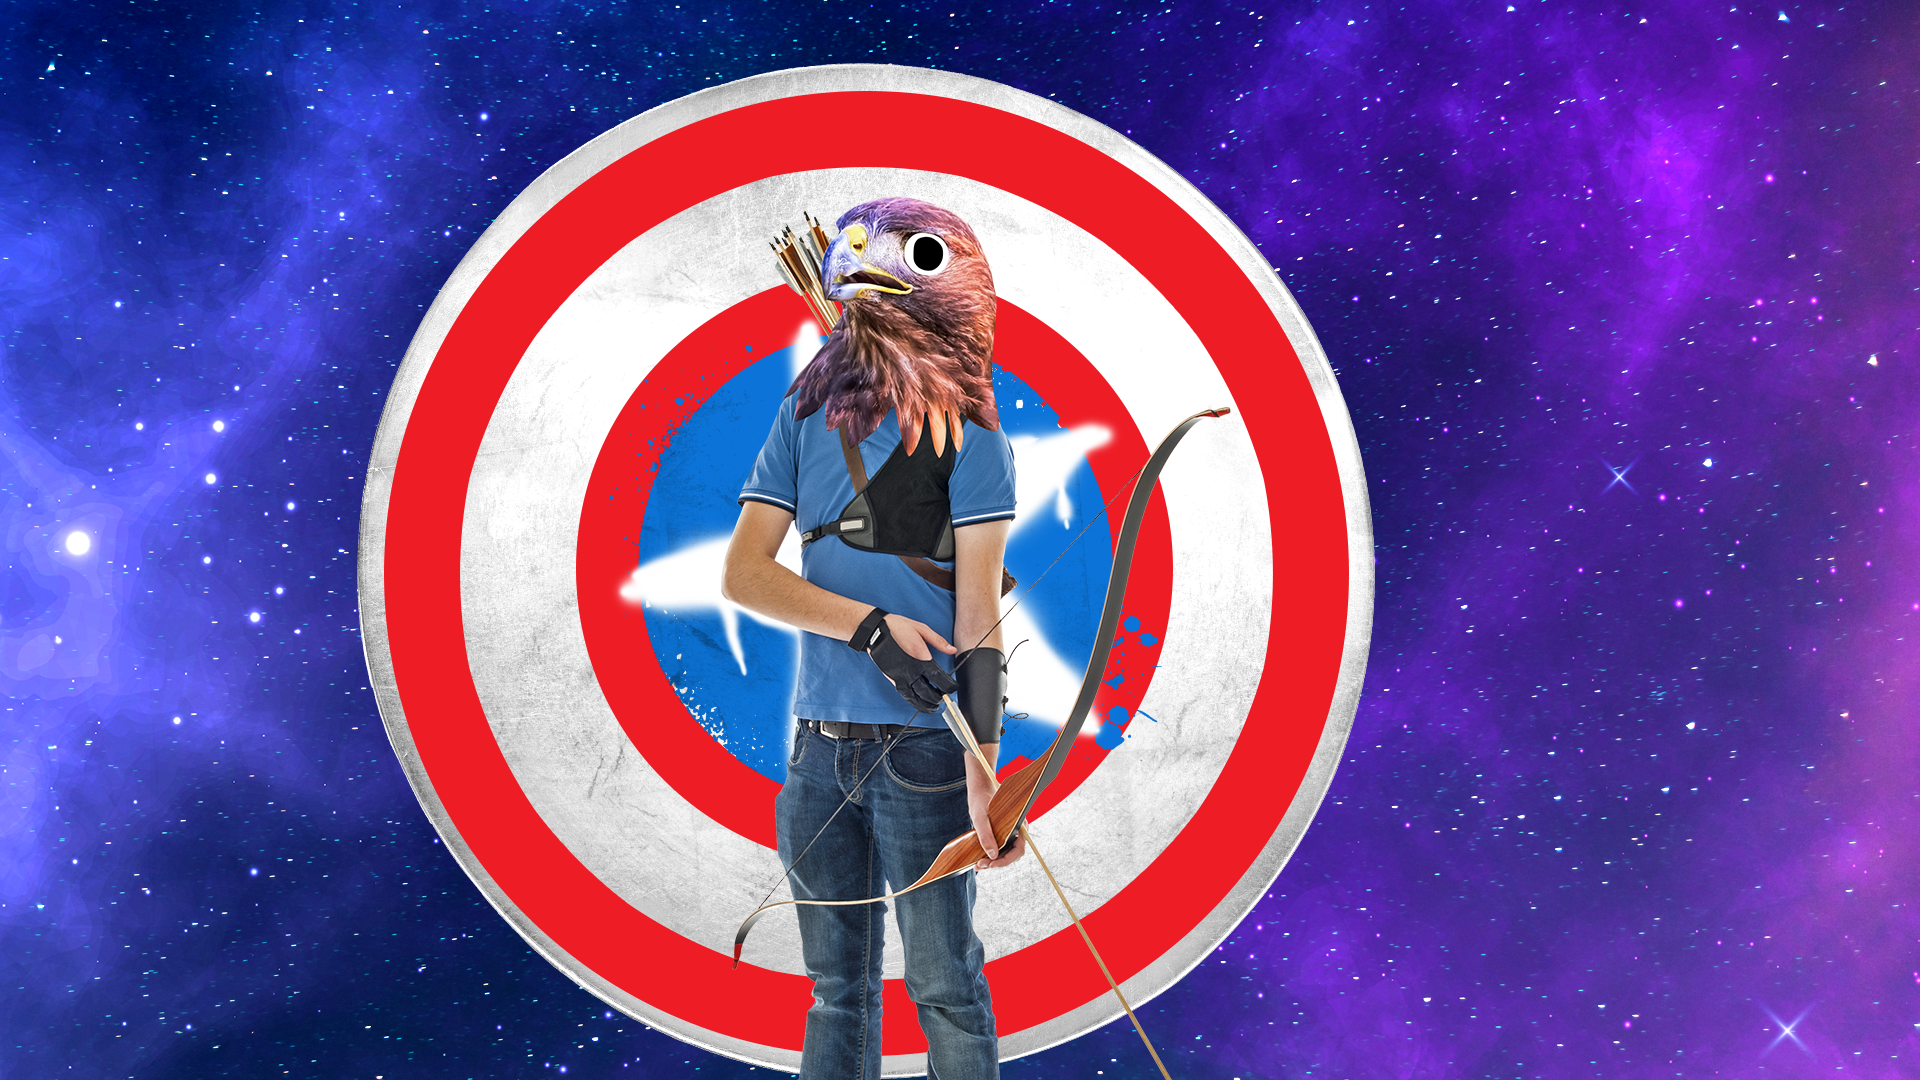 Hawkeye hawk on captain shield and space background 